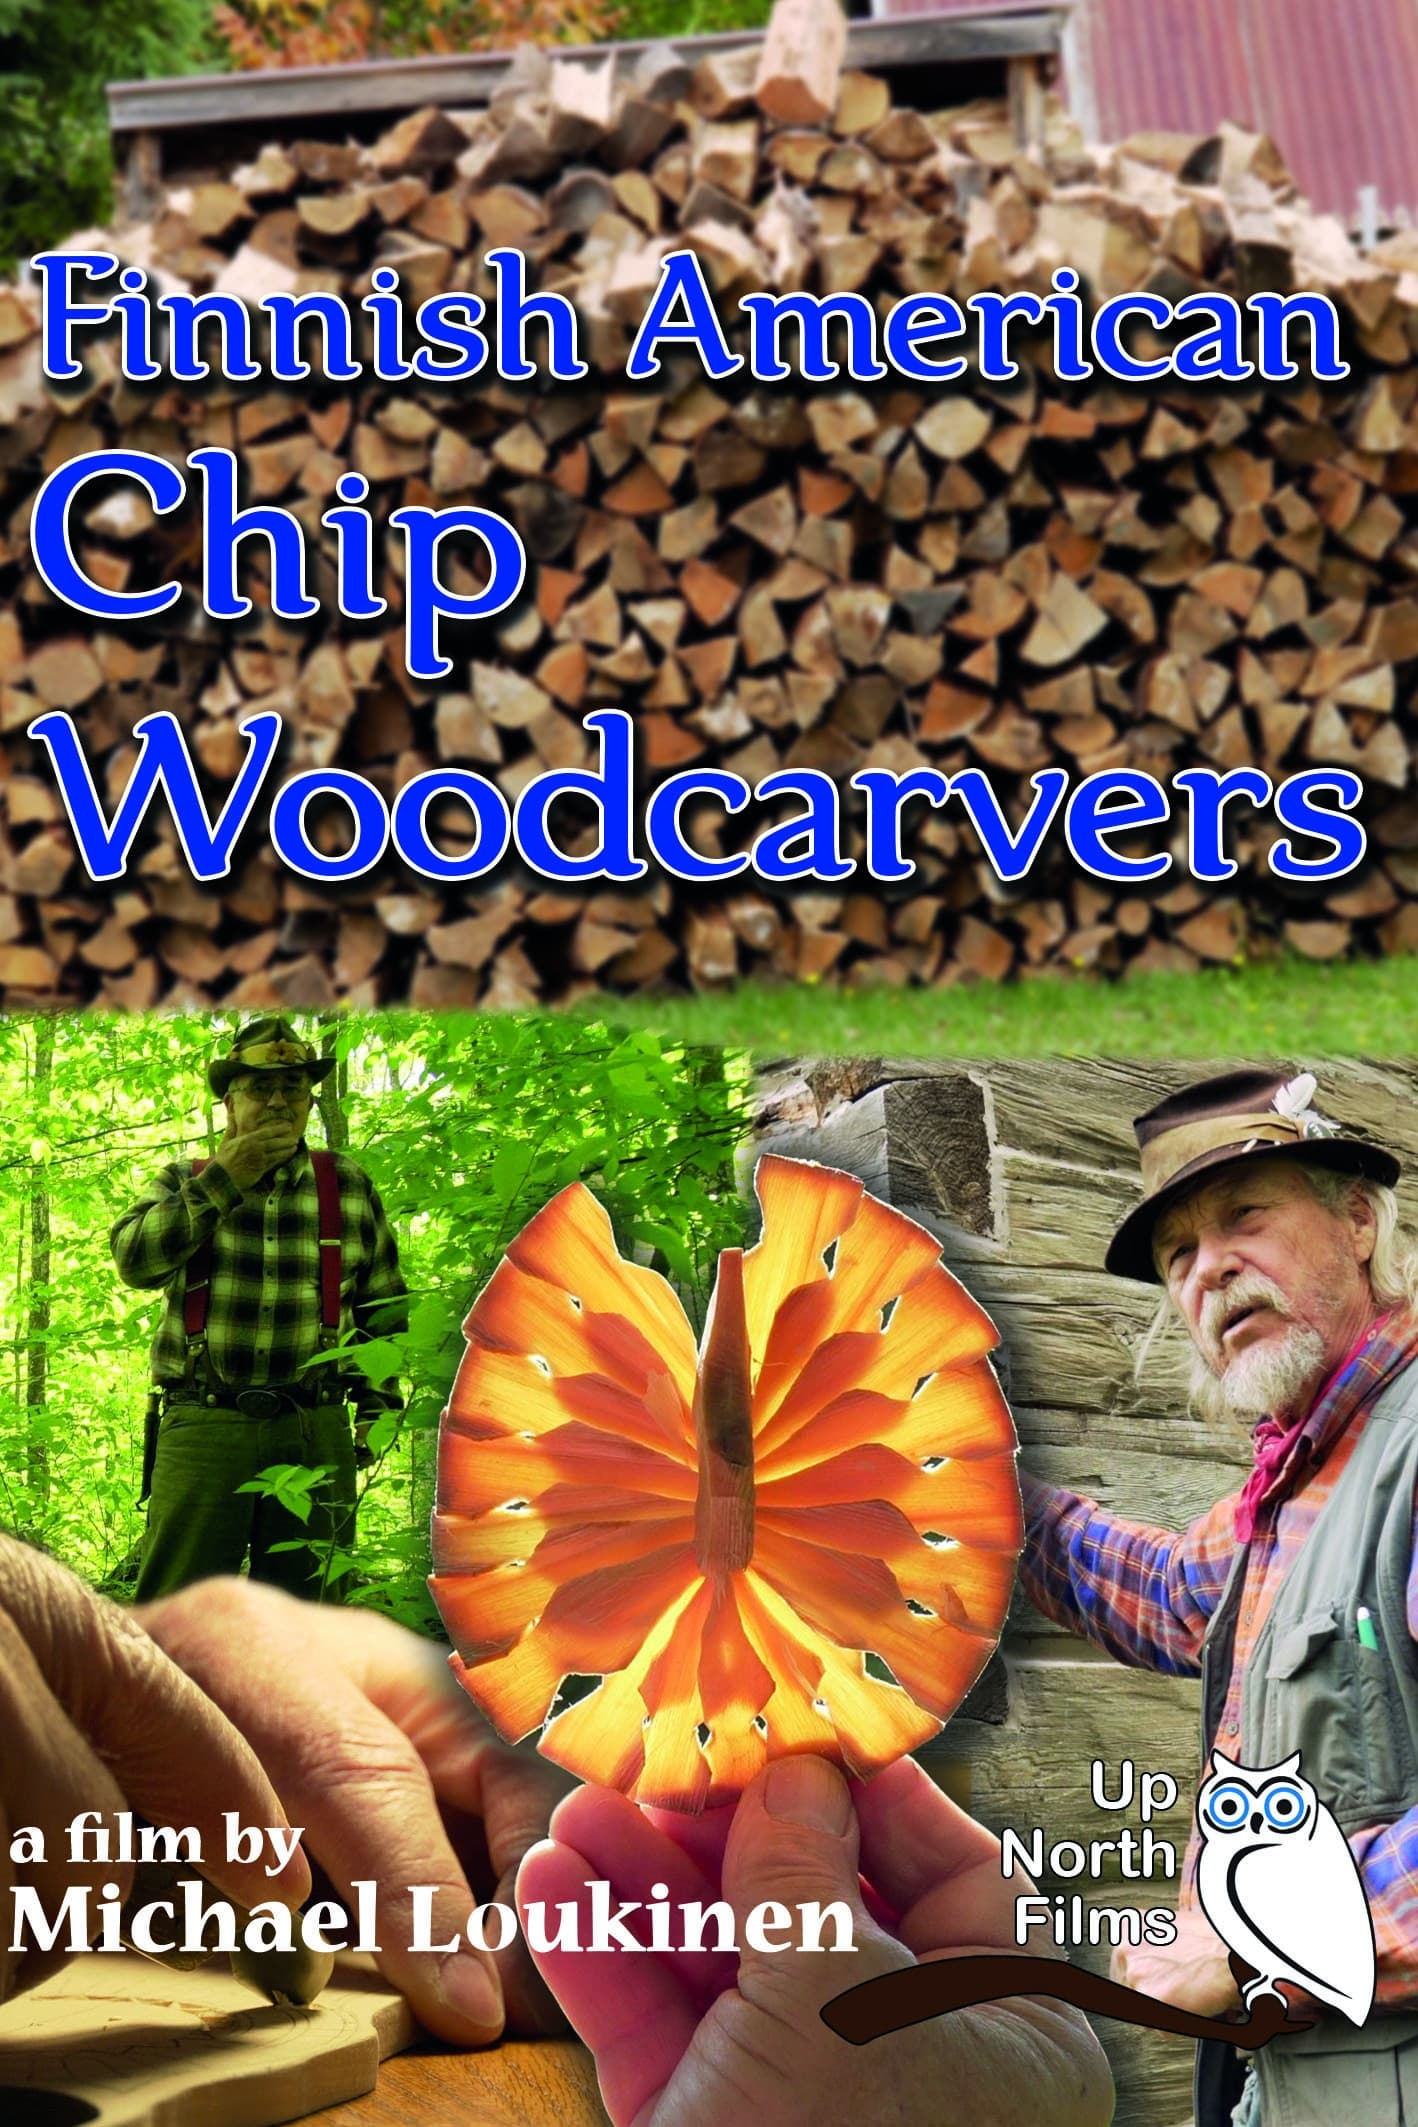 Finnish American Chip Woodcarvers